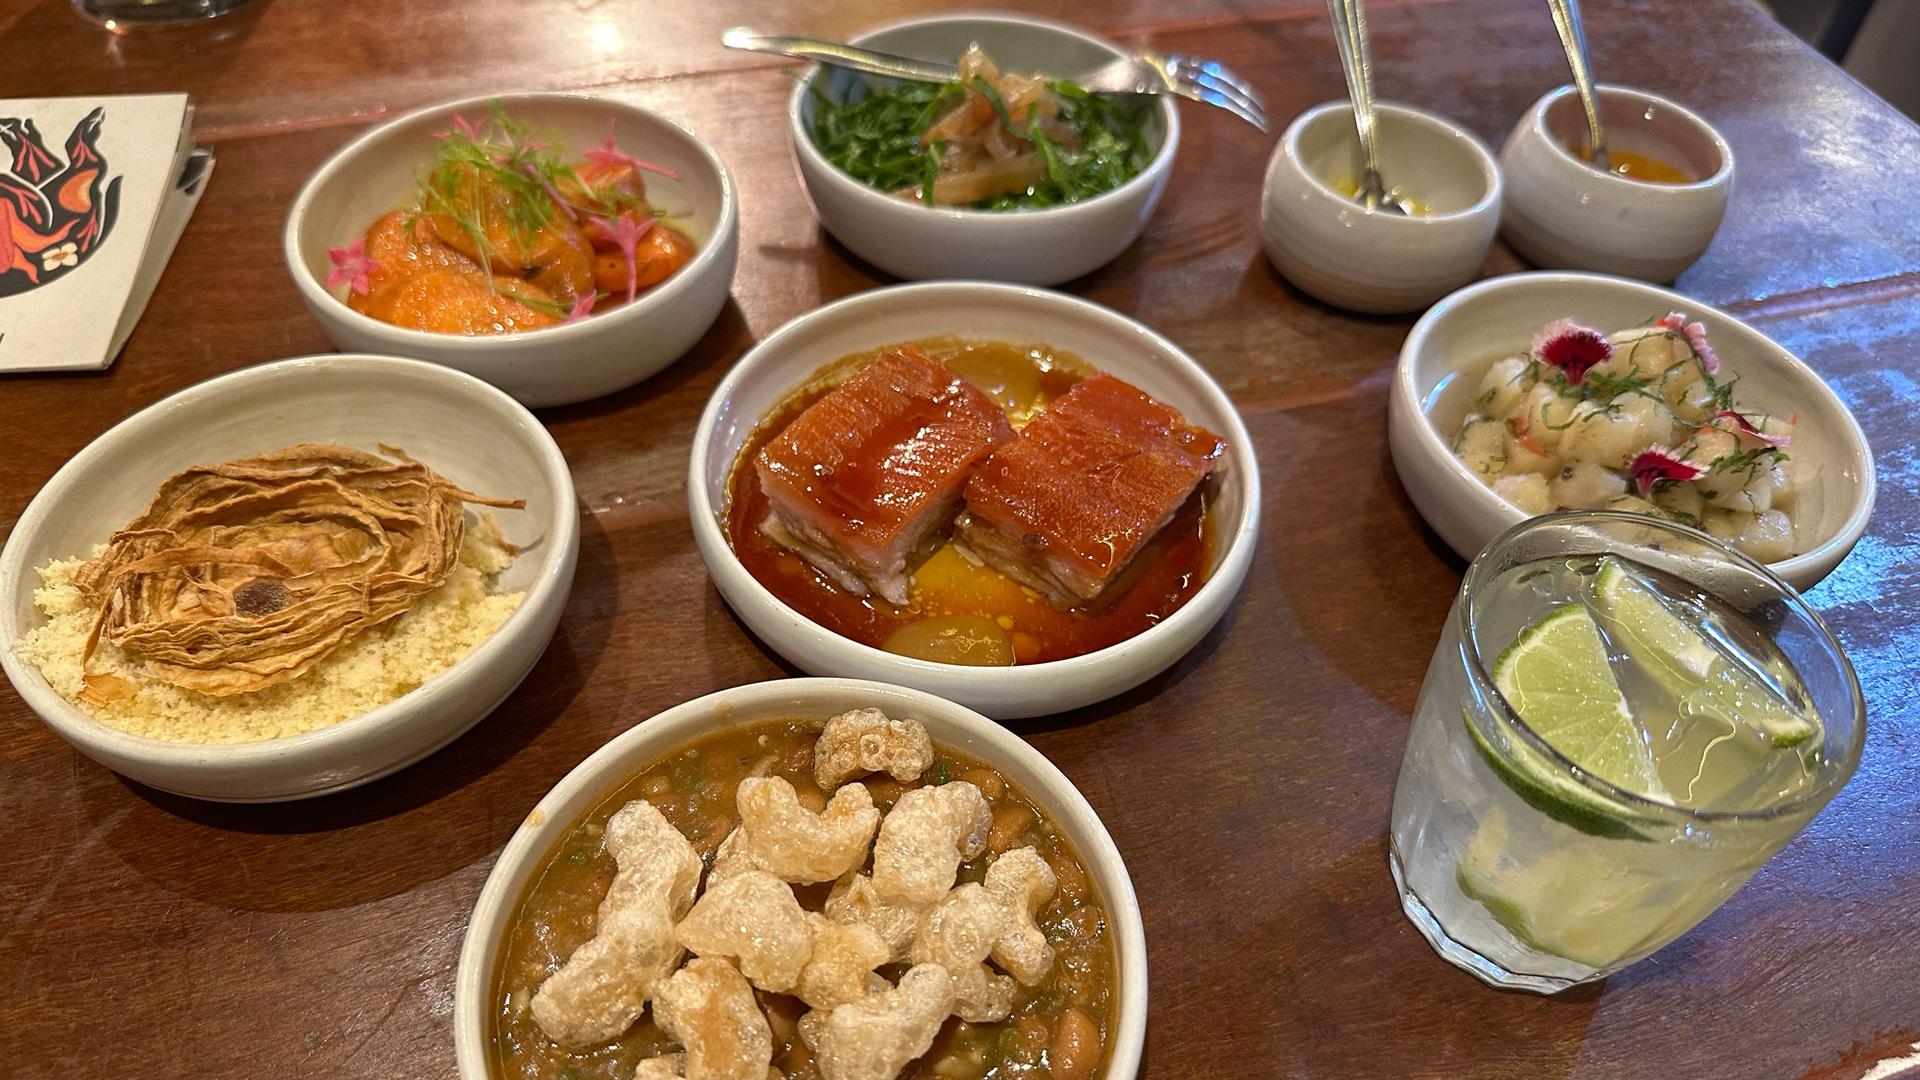 One of the main dishes at The Pork House includes a crunchy roasted pork with beans and fresh vegetables and is paired with the Brazilian national drink: caipirinha. 